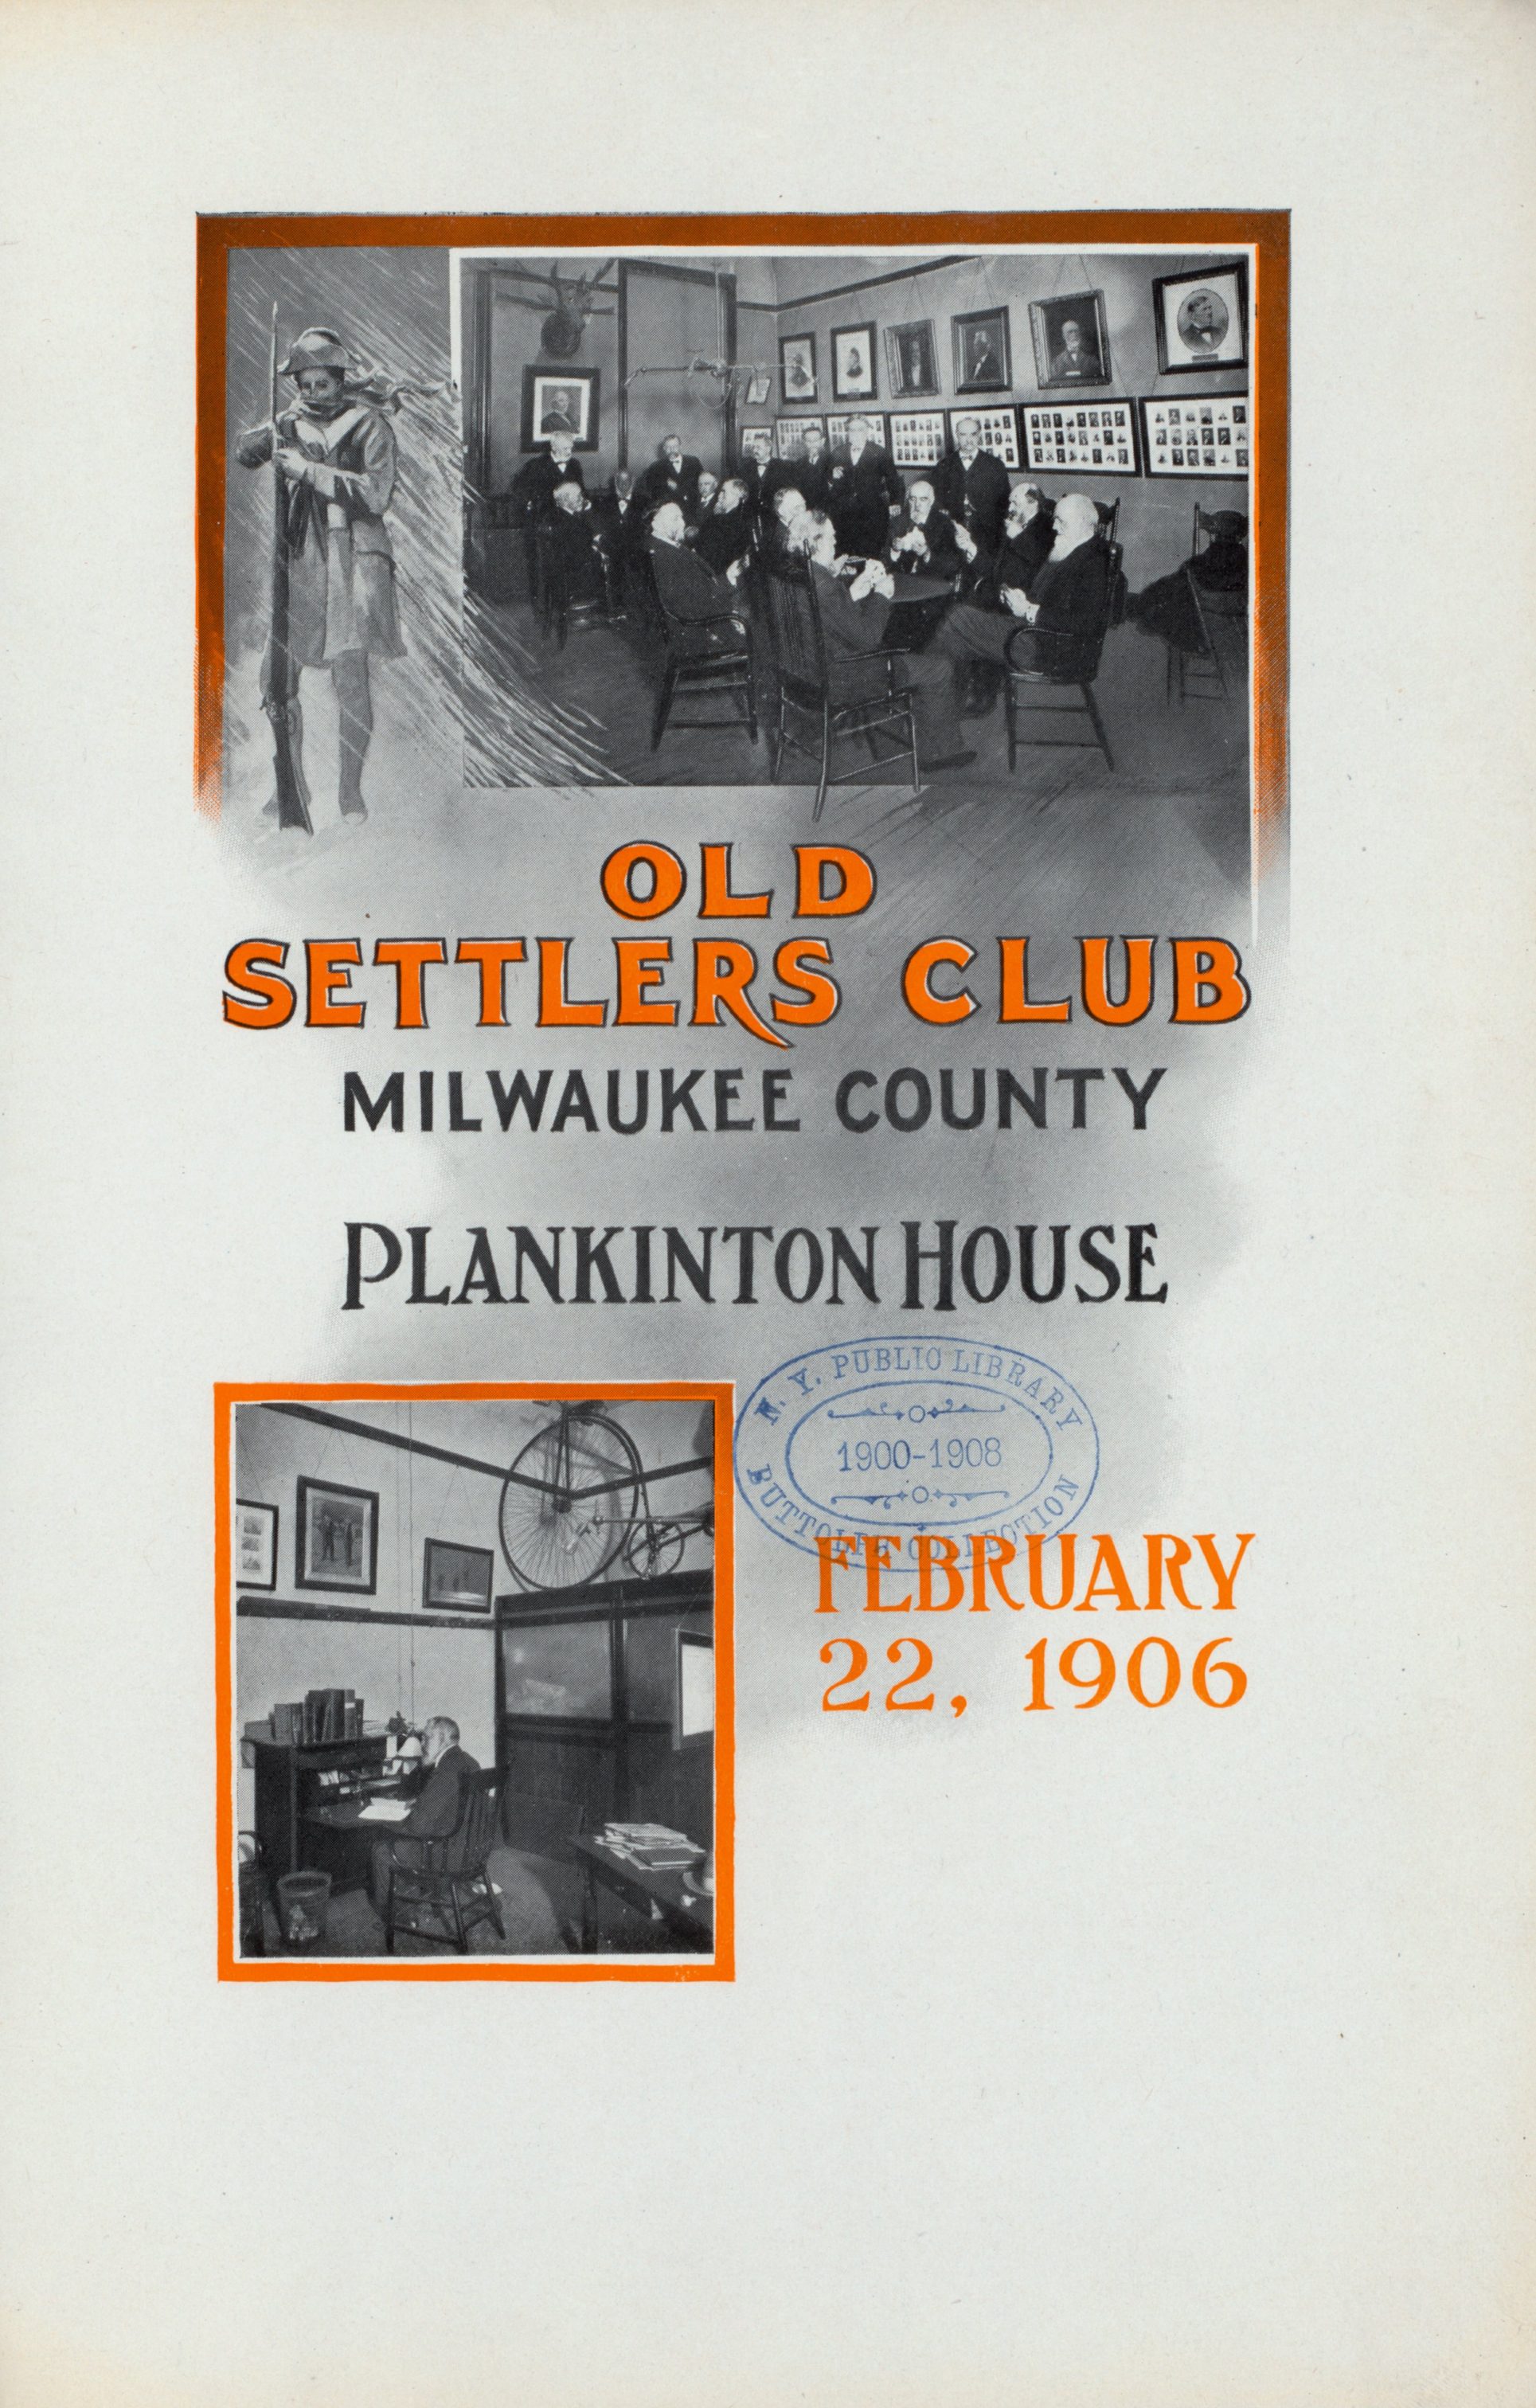 This is the front cover of a program for a dinner held by the Old Settlers' Club at the Plankinton House in 1906. The program contains a list of members, toasts, and even the menu of that evening. 